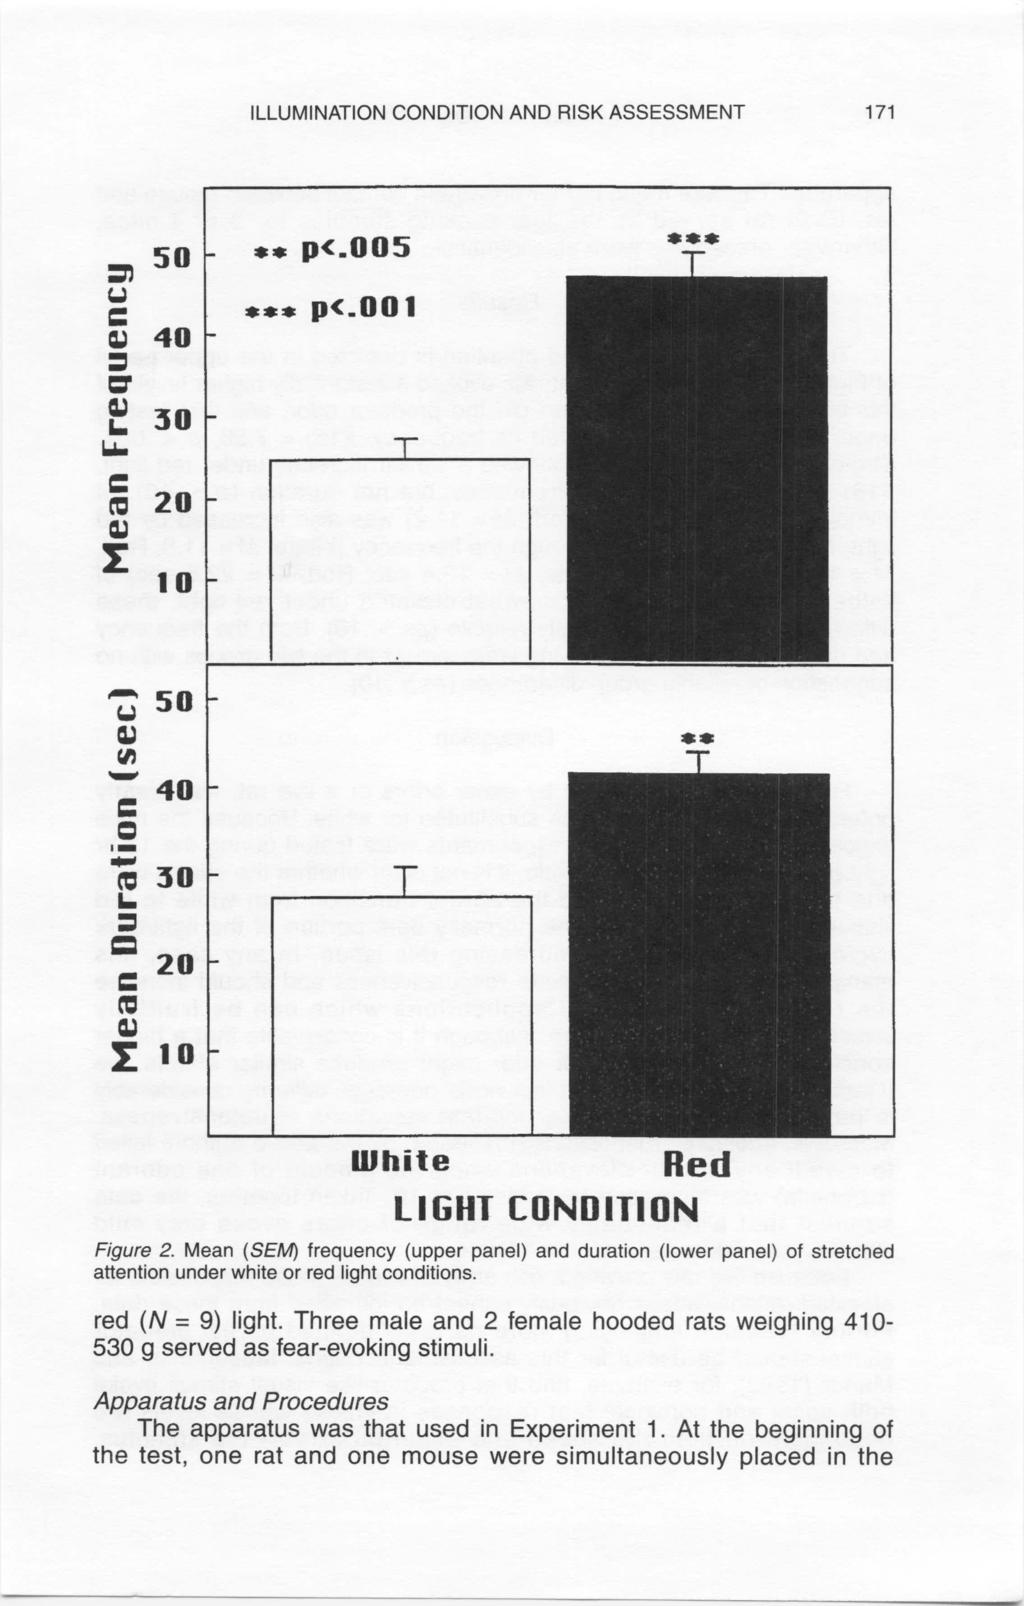 ILLUMINATION CONDITION AND RISK ASSESSMENT 171 50 (.) 40 - L. 30 ra 20 10 p<.005 p<.oo 1 (.) 50 40.-.., 30 L. 20 10 Red LIGHT CONDITION White Figure 2.